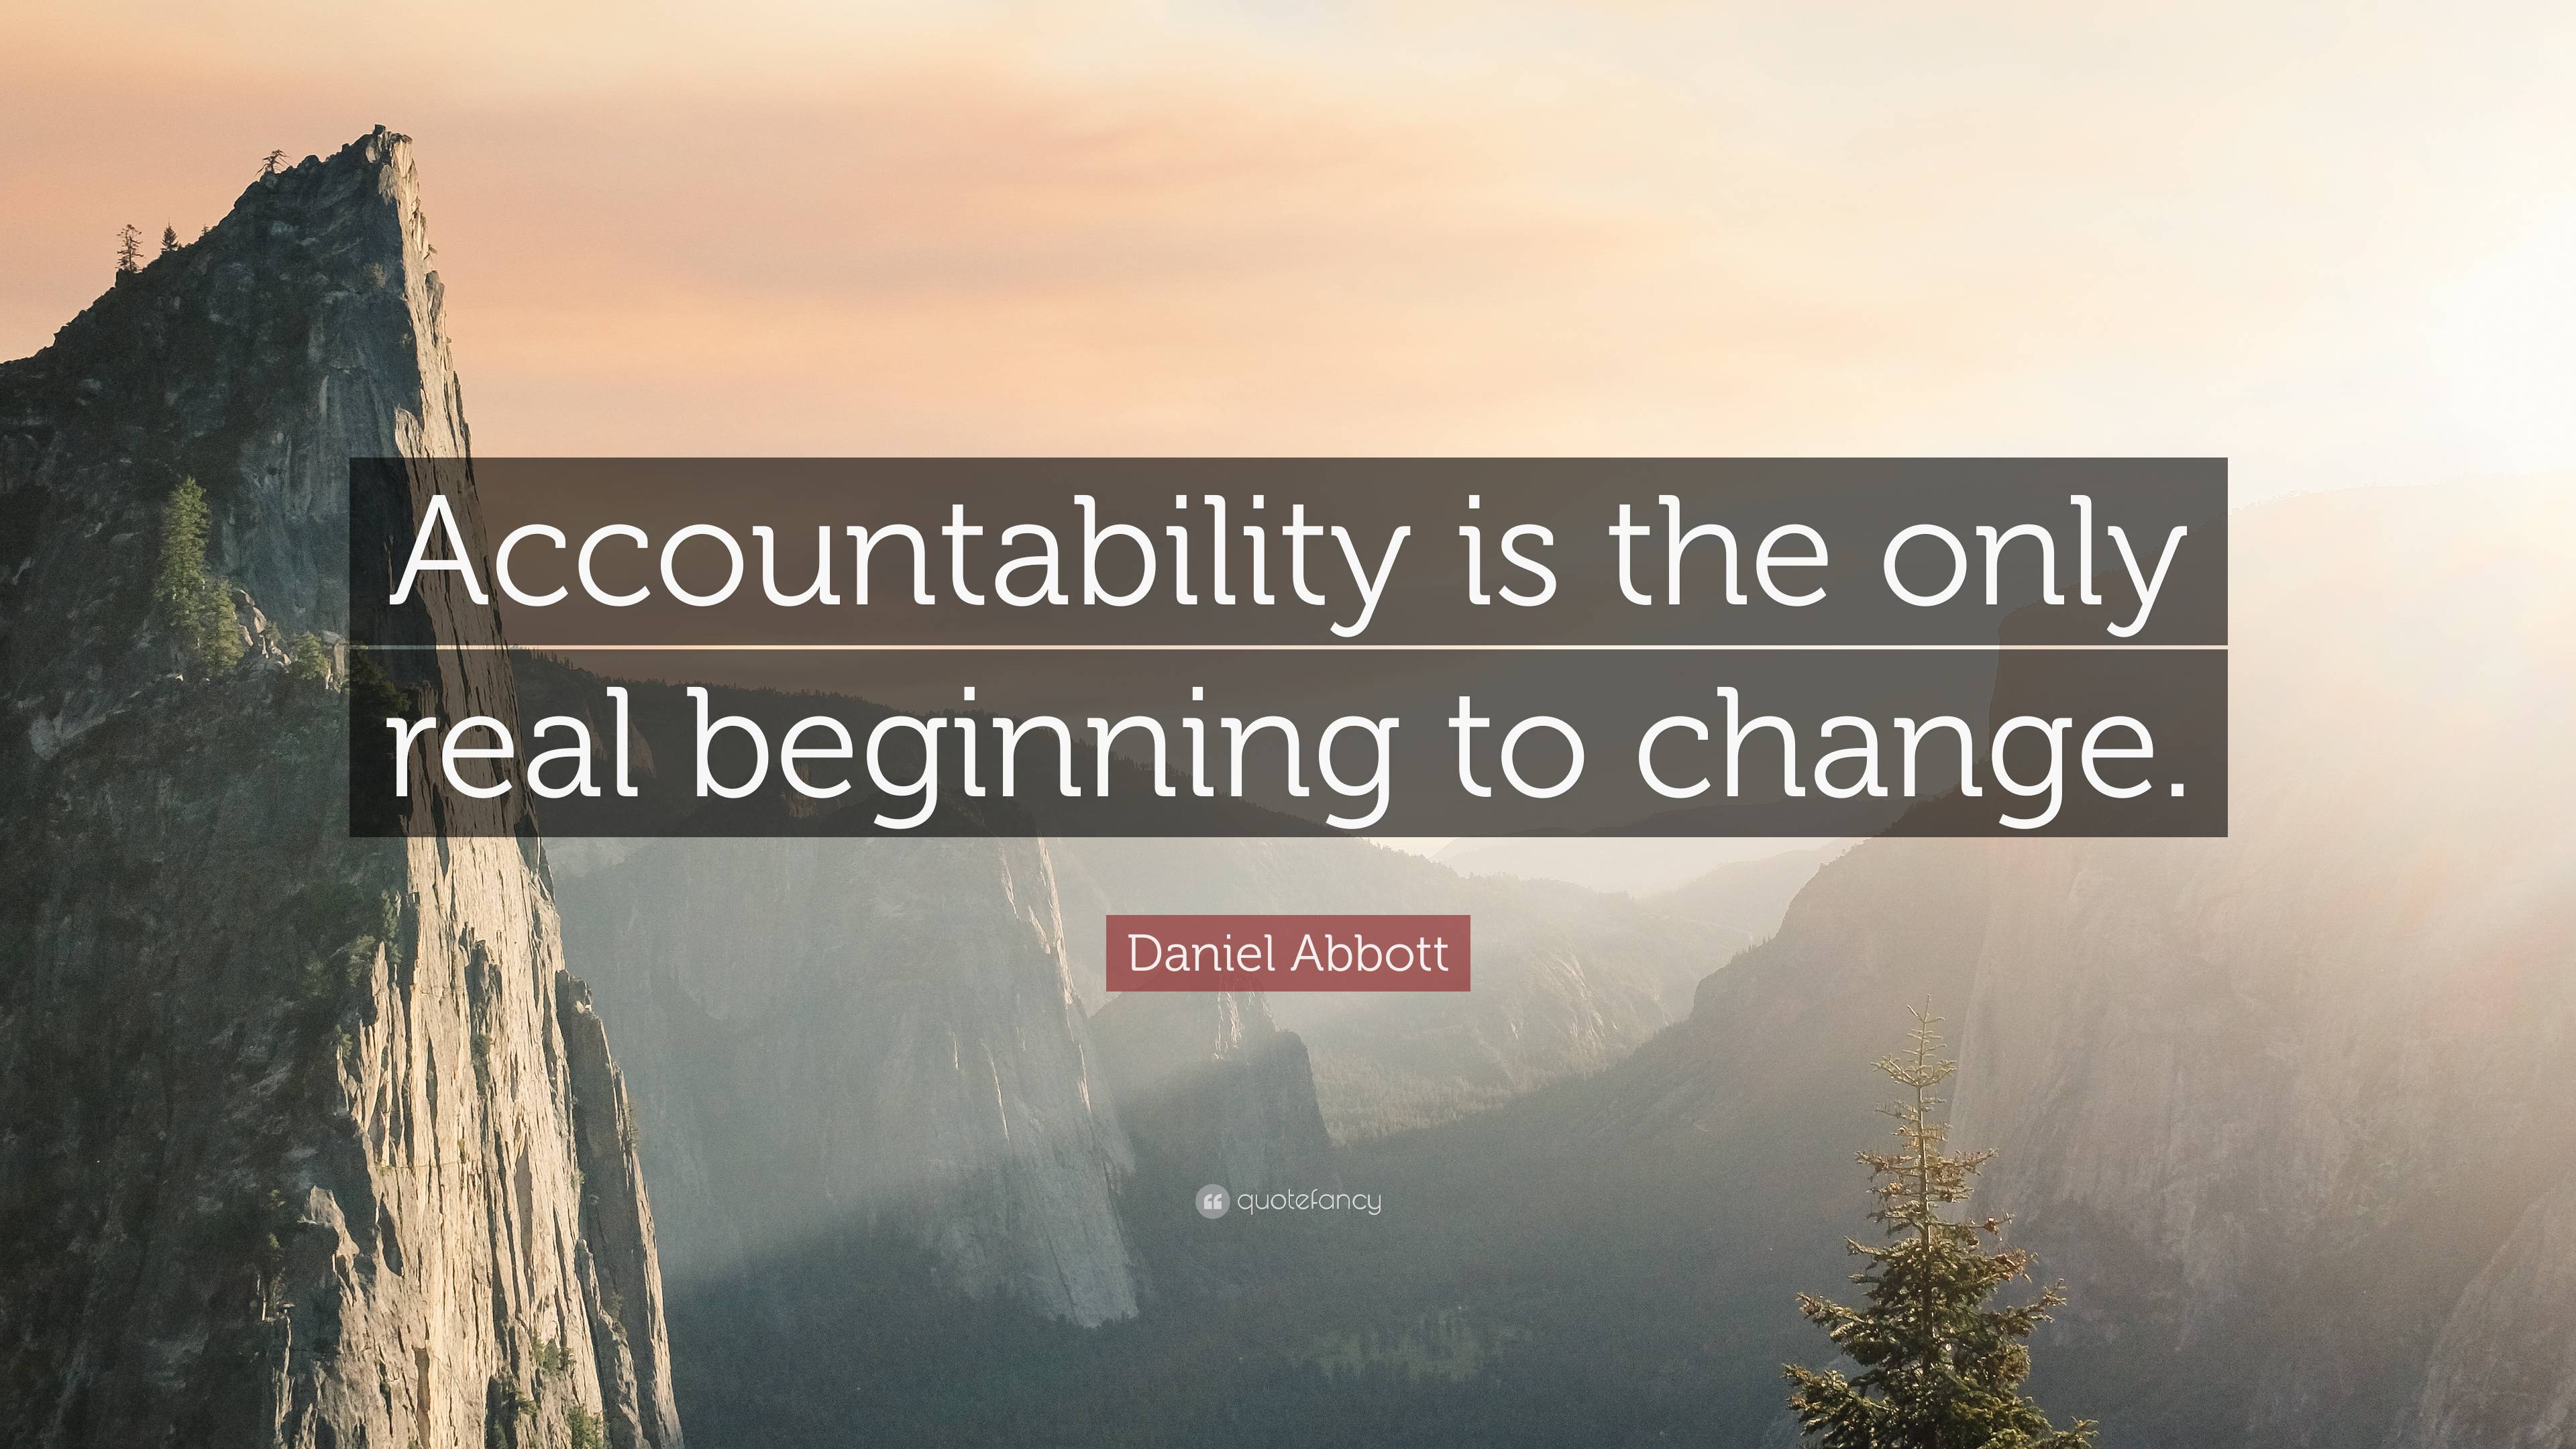 Daniel Abbott Quote: “Accountability is the only real beginning to change.”